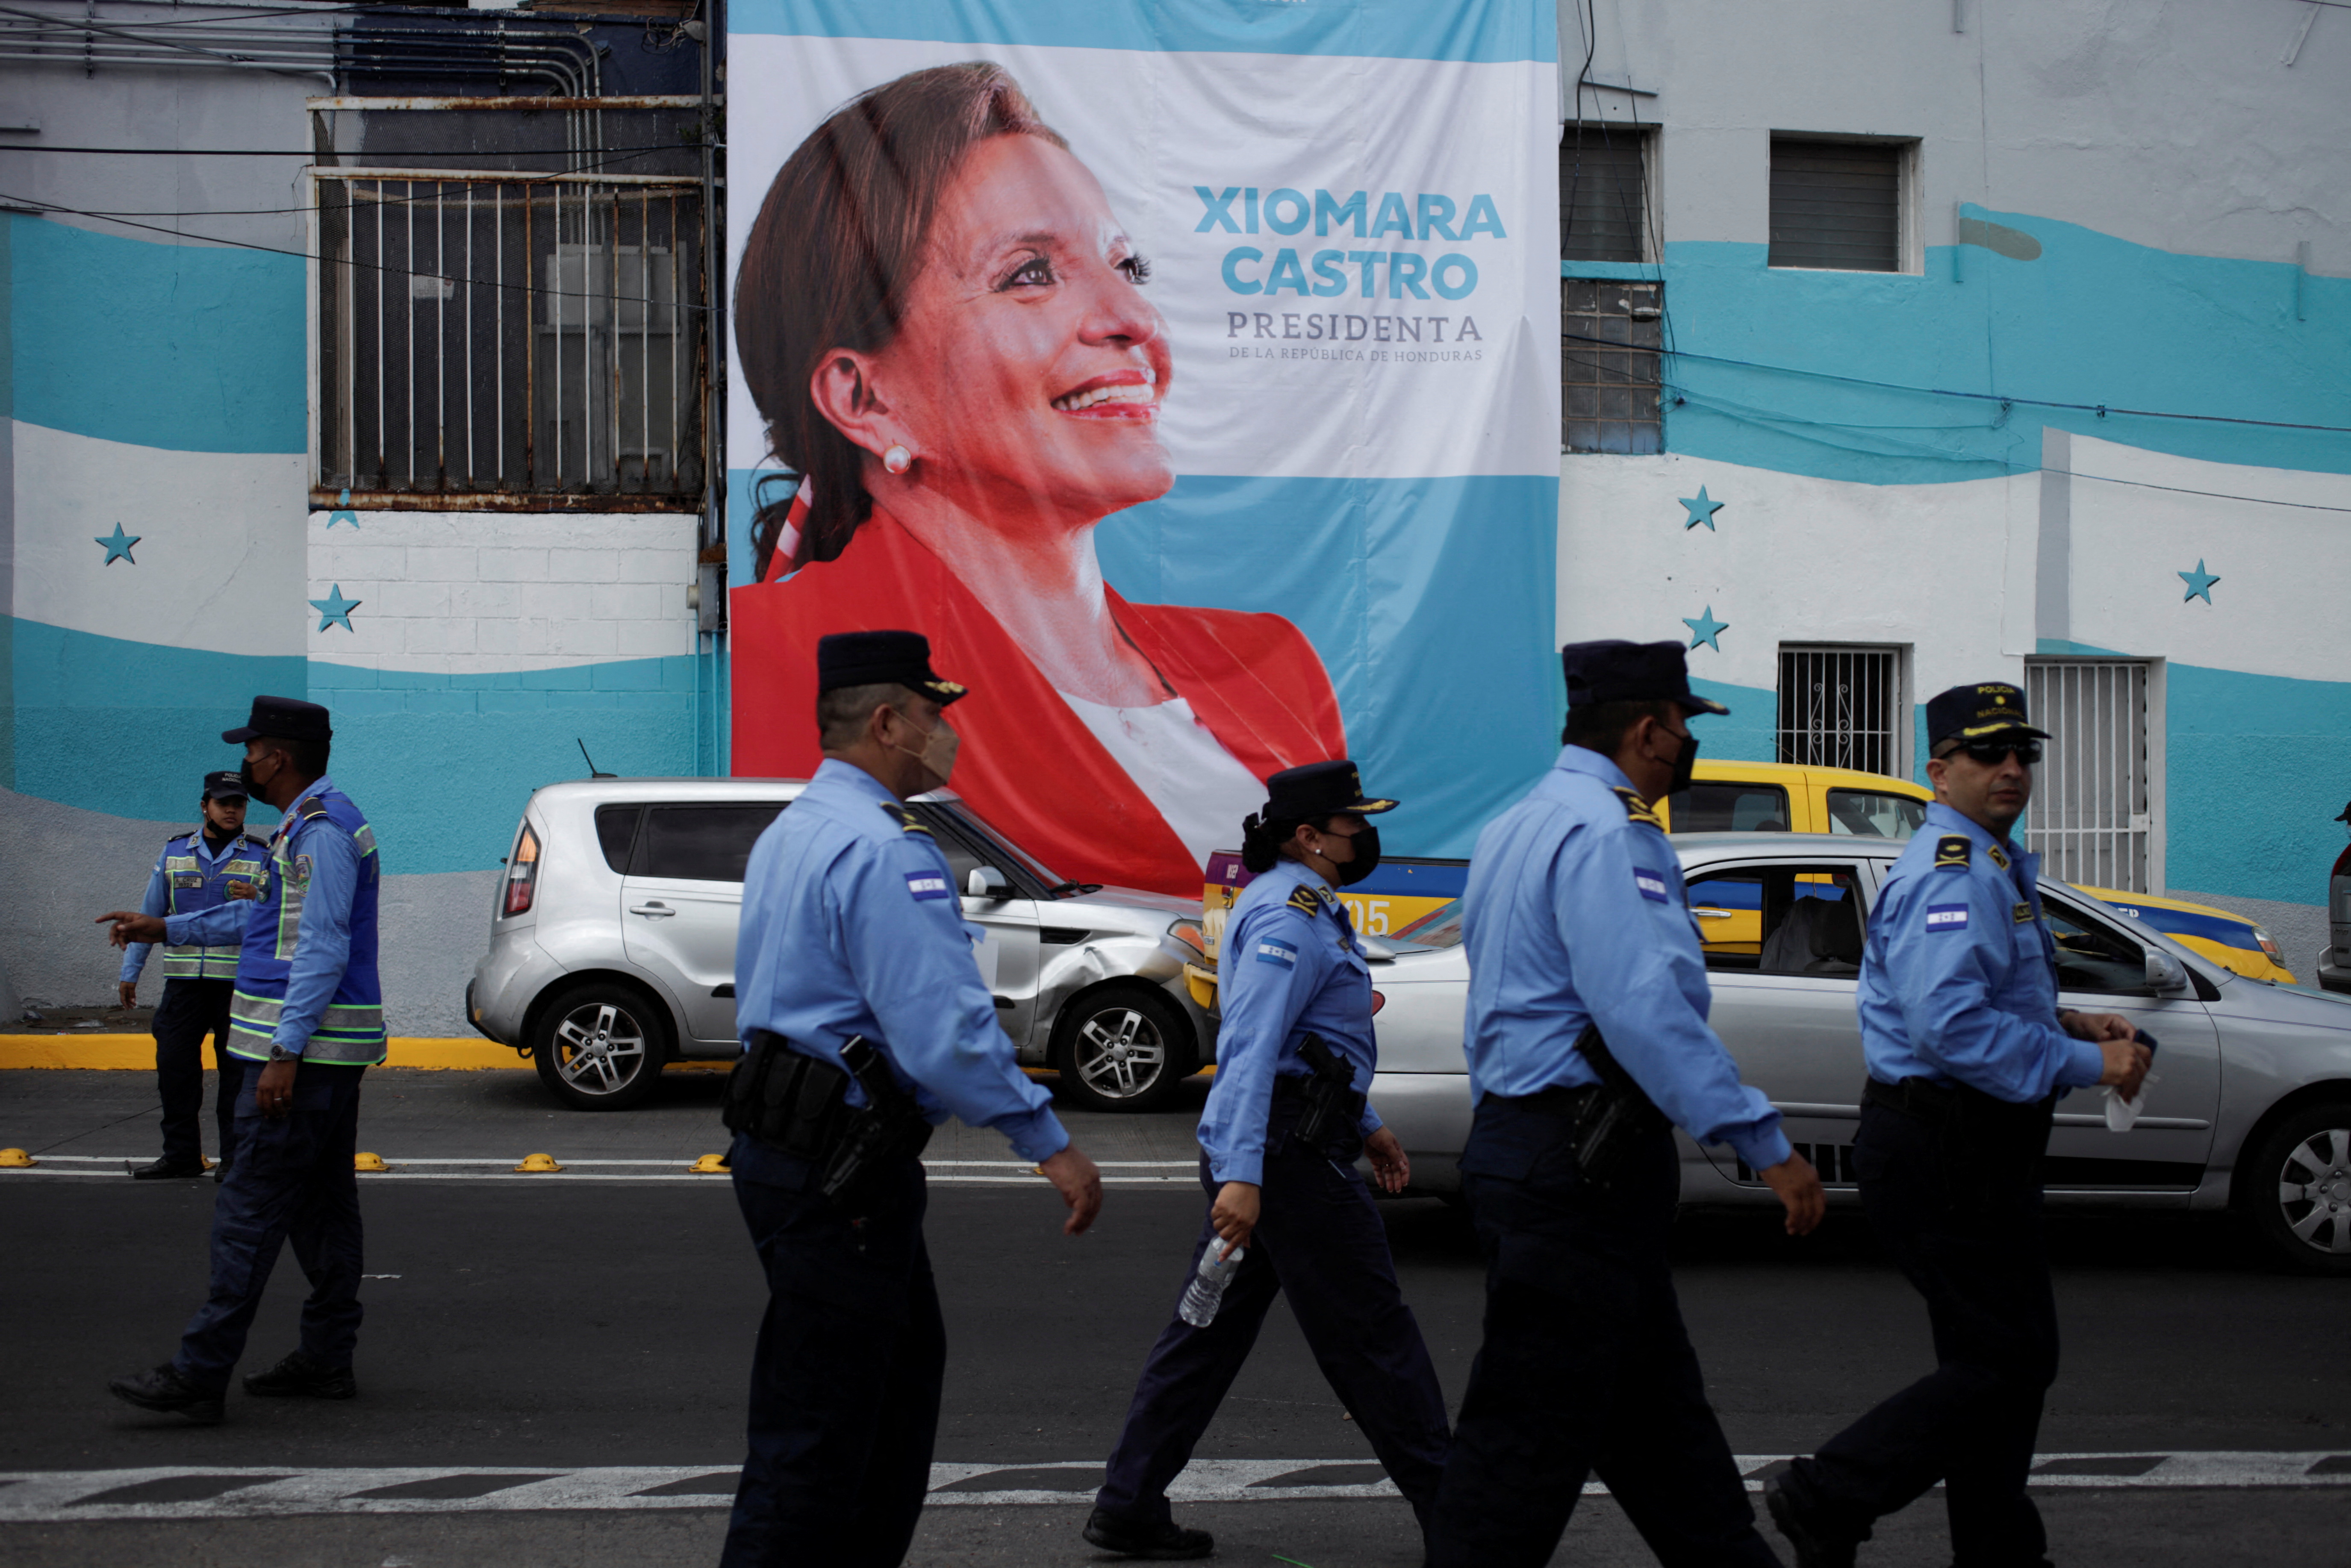 Preparations ahead of the swearing-in ceremony of Honduras' President-elect Xiomara Castro, in Tegucigalpa